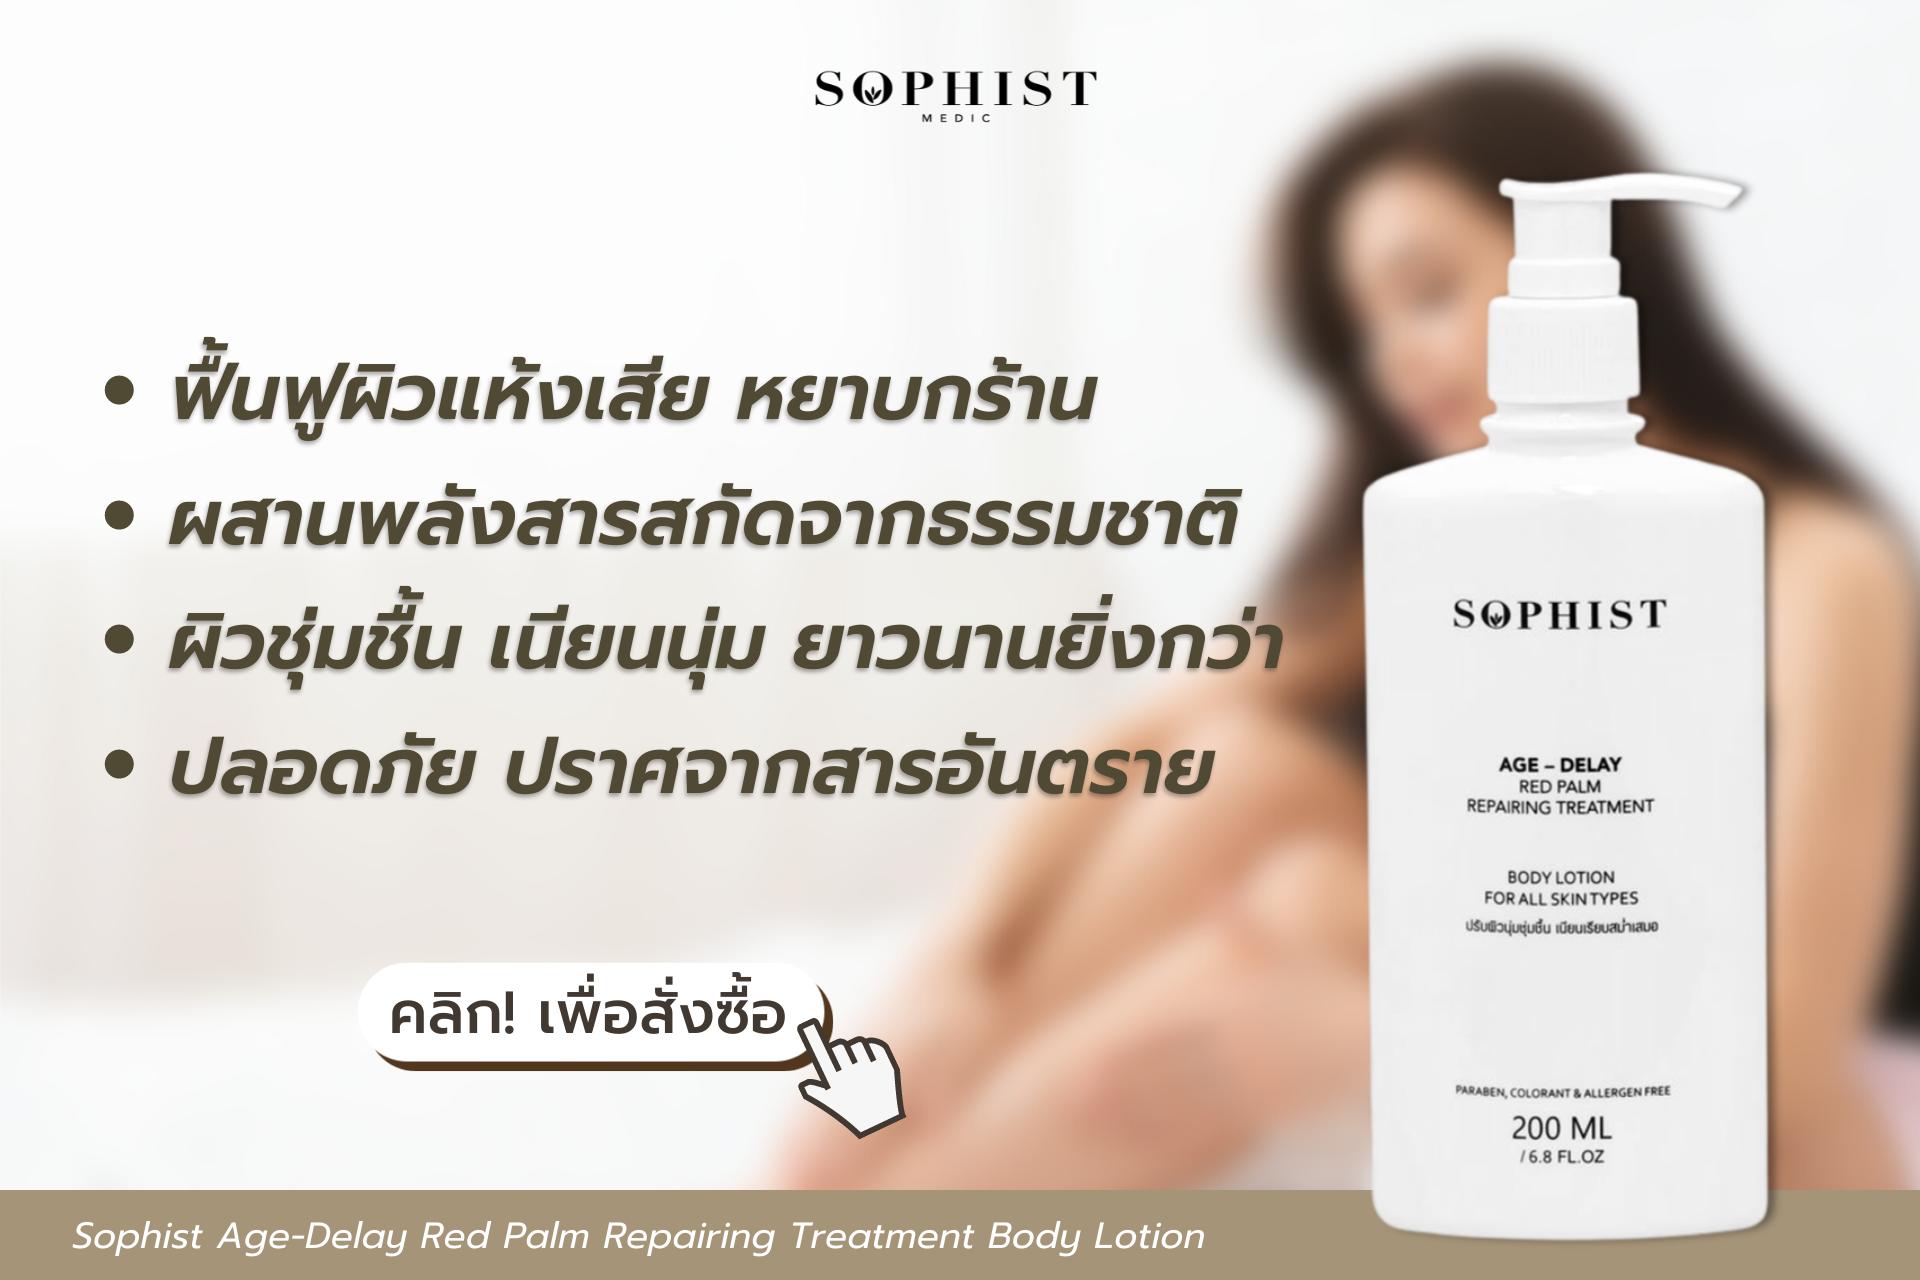 Sophist Age-Delay Red Palm Repairing Treatment Body Lotion 